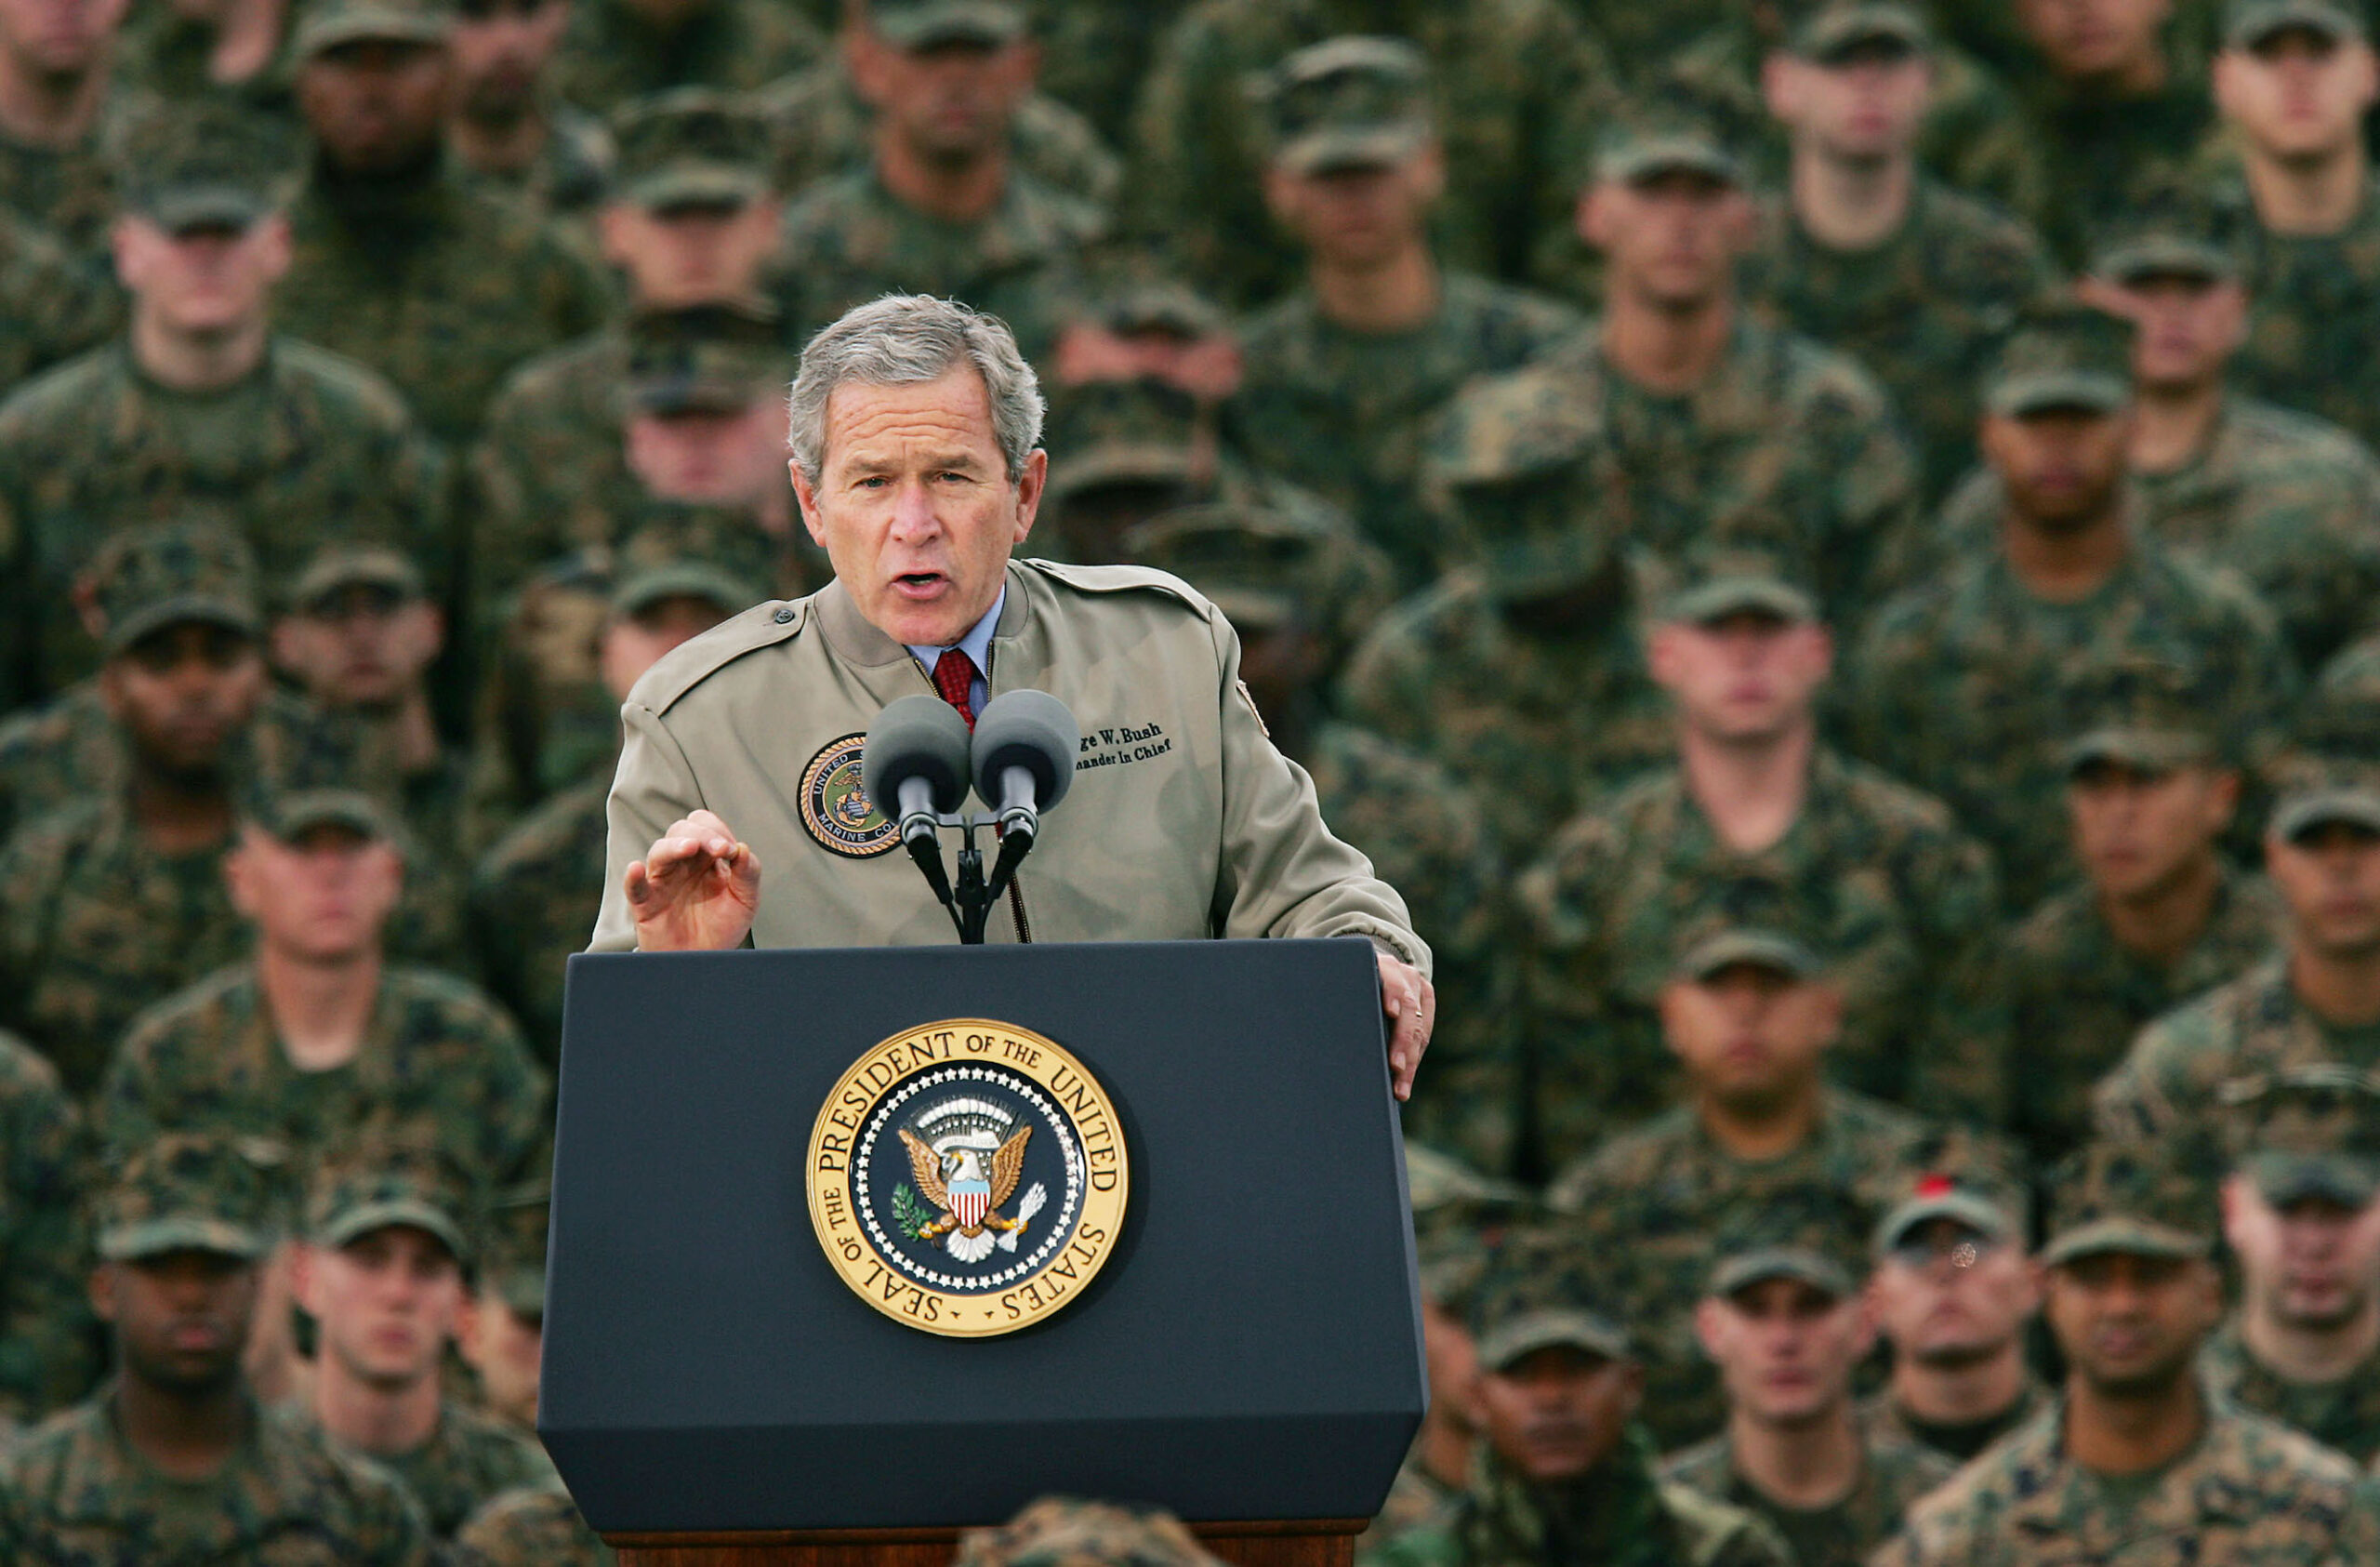 President George W. Bush speaks to Marines on the anniversary of the attack on Pearl Harbor, December 7, 2004, Camp Pendleton, California